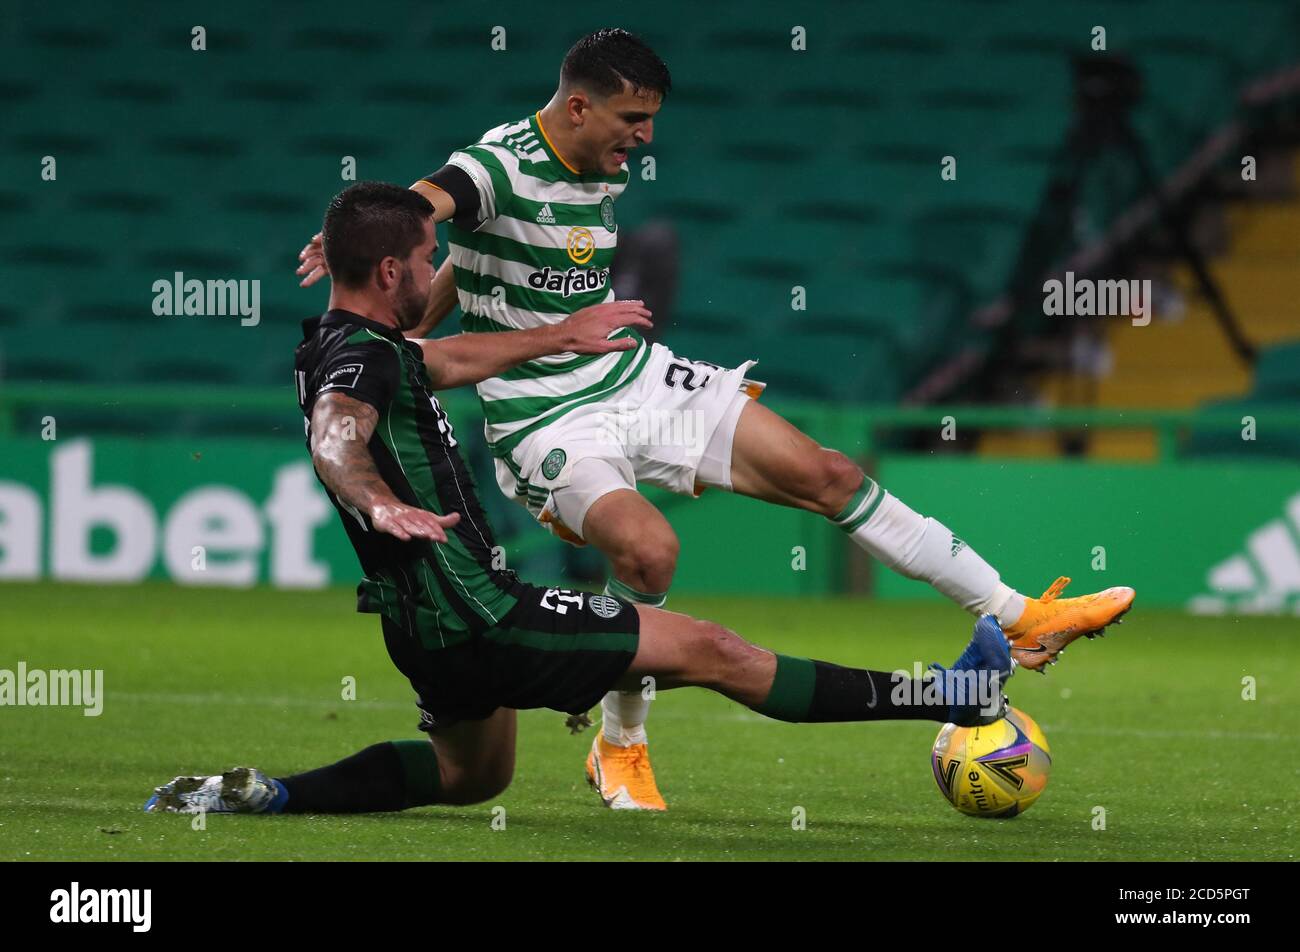 Celtic's Mohamed Elyounoussi (right) and Ferencvaros' Endre Botka battle for the ball during the UEFA Champions League second qualifying round match at Celtic Park, Glasgow. Stock Photo